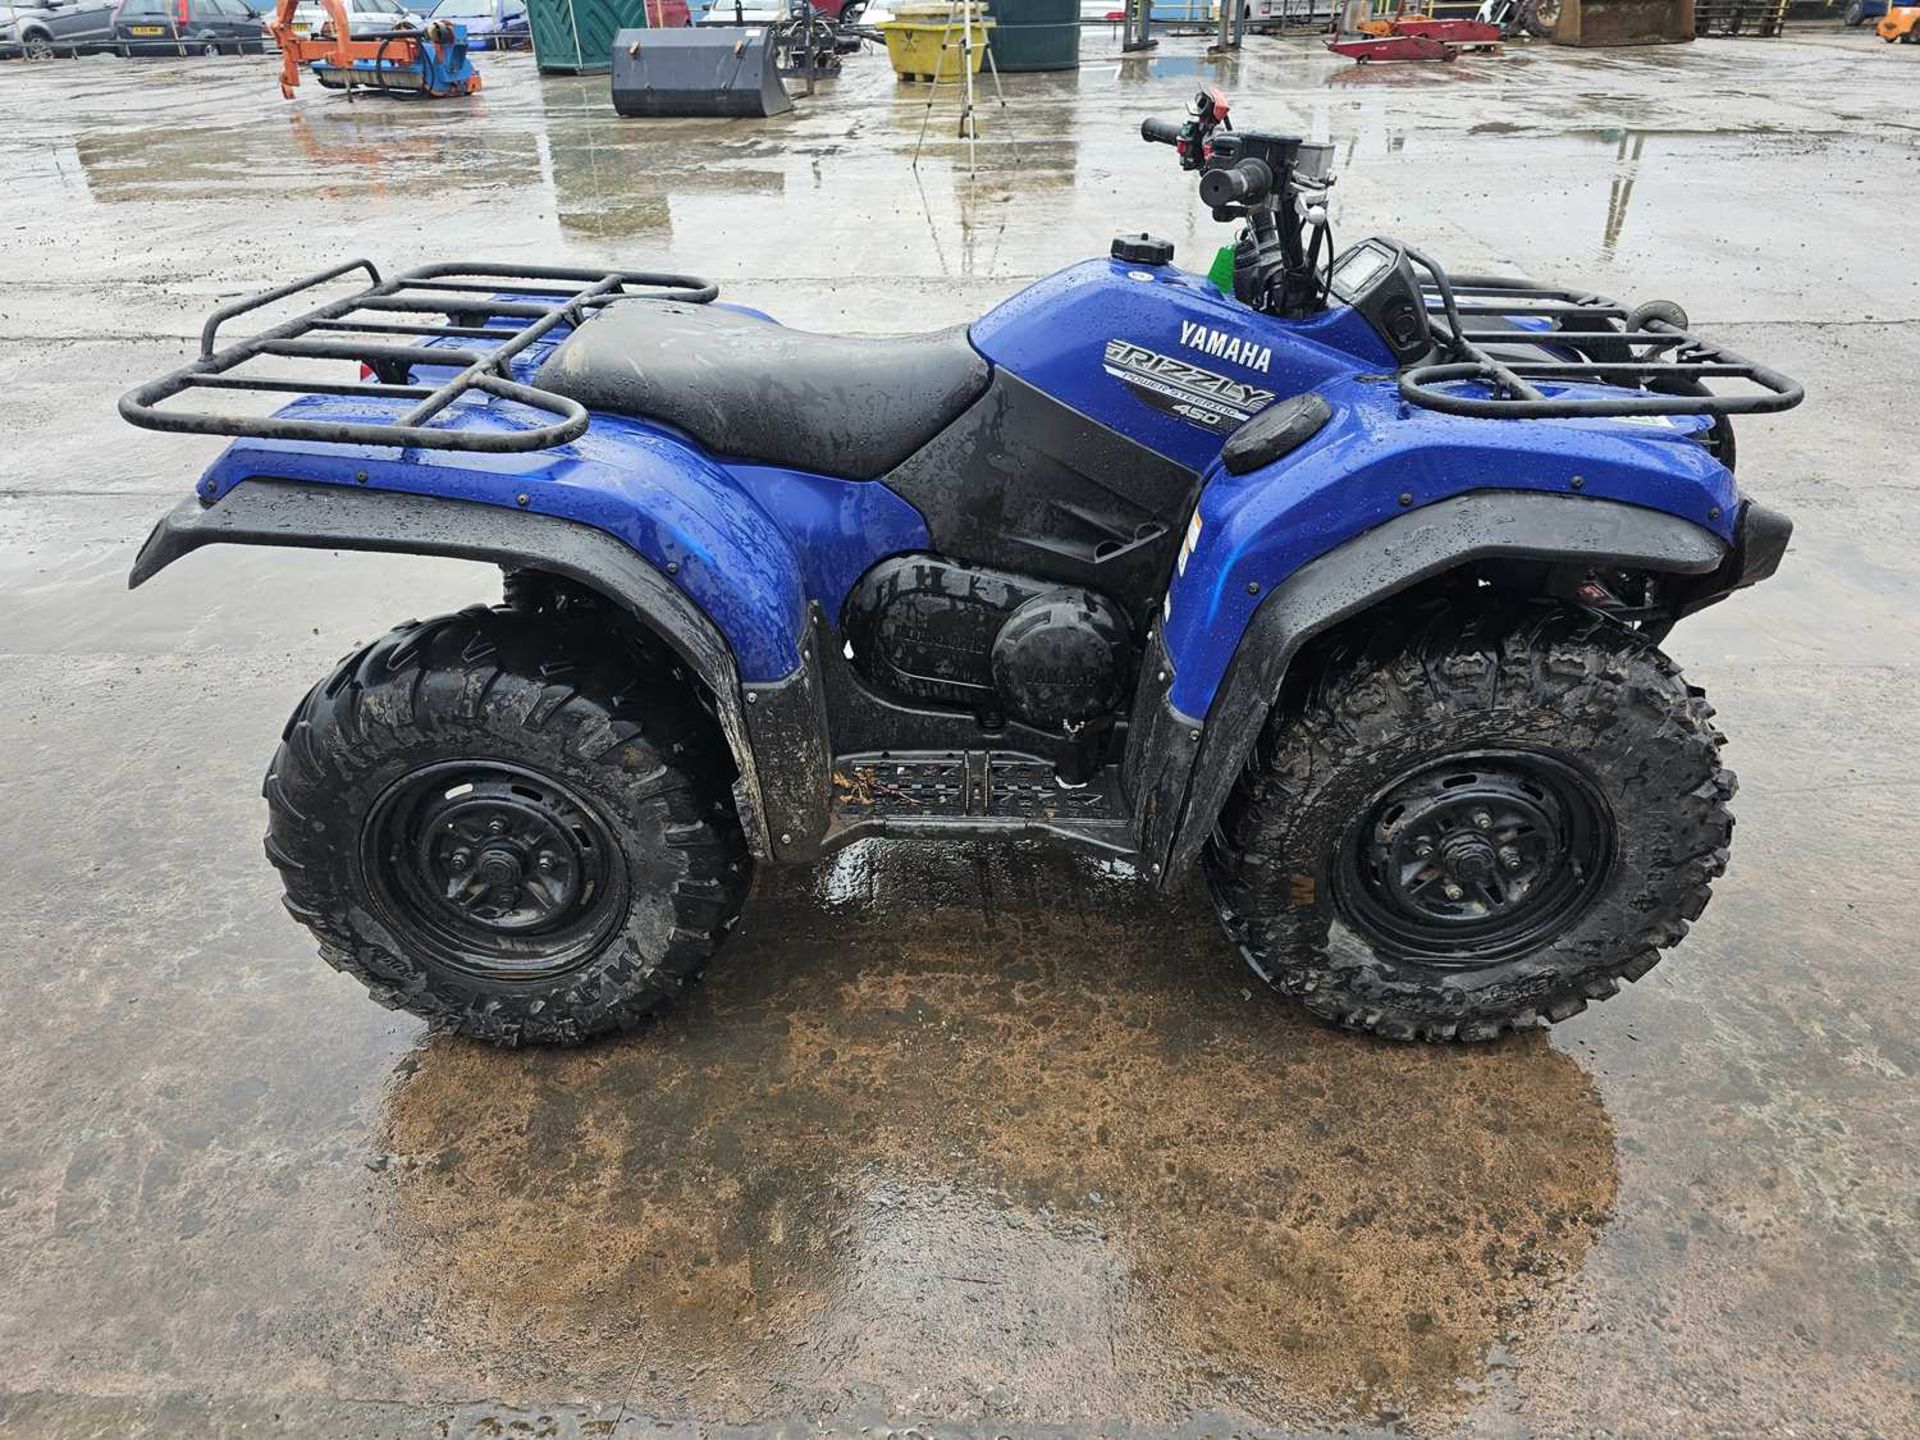 2016 Yamaha Grizzly 450cc 4WD Petrol Quad Bike, Winch, Power Steering - Image 6 of 19